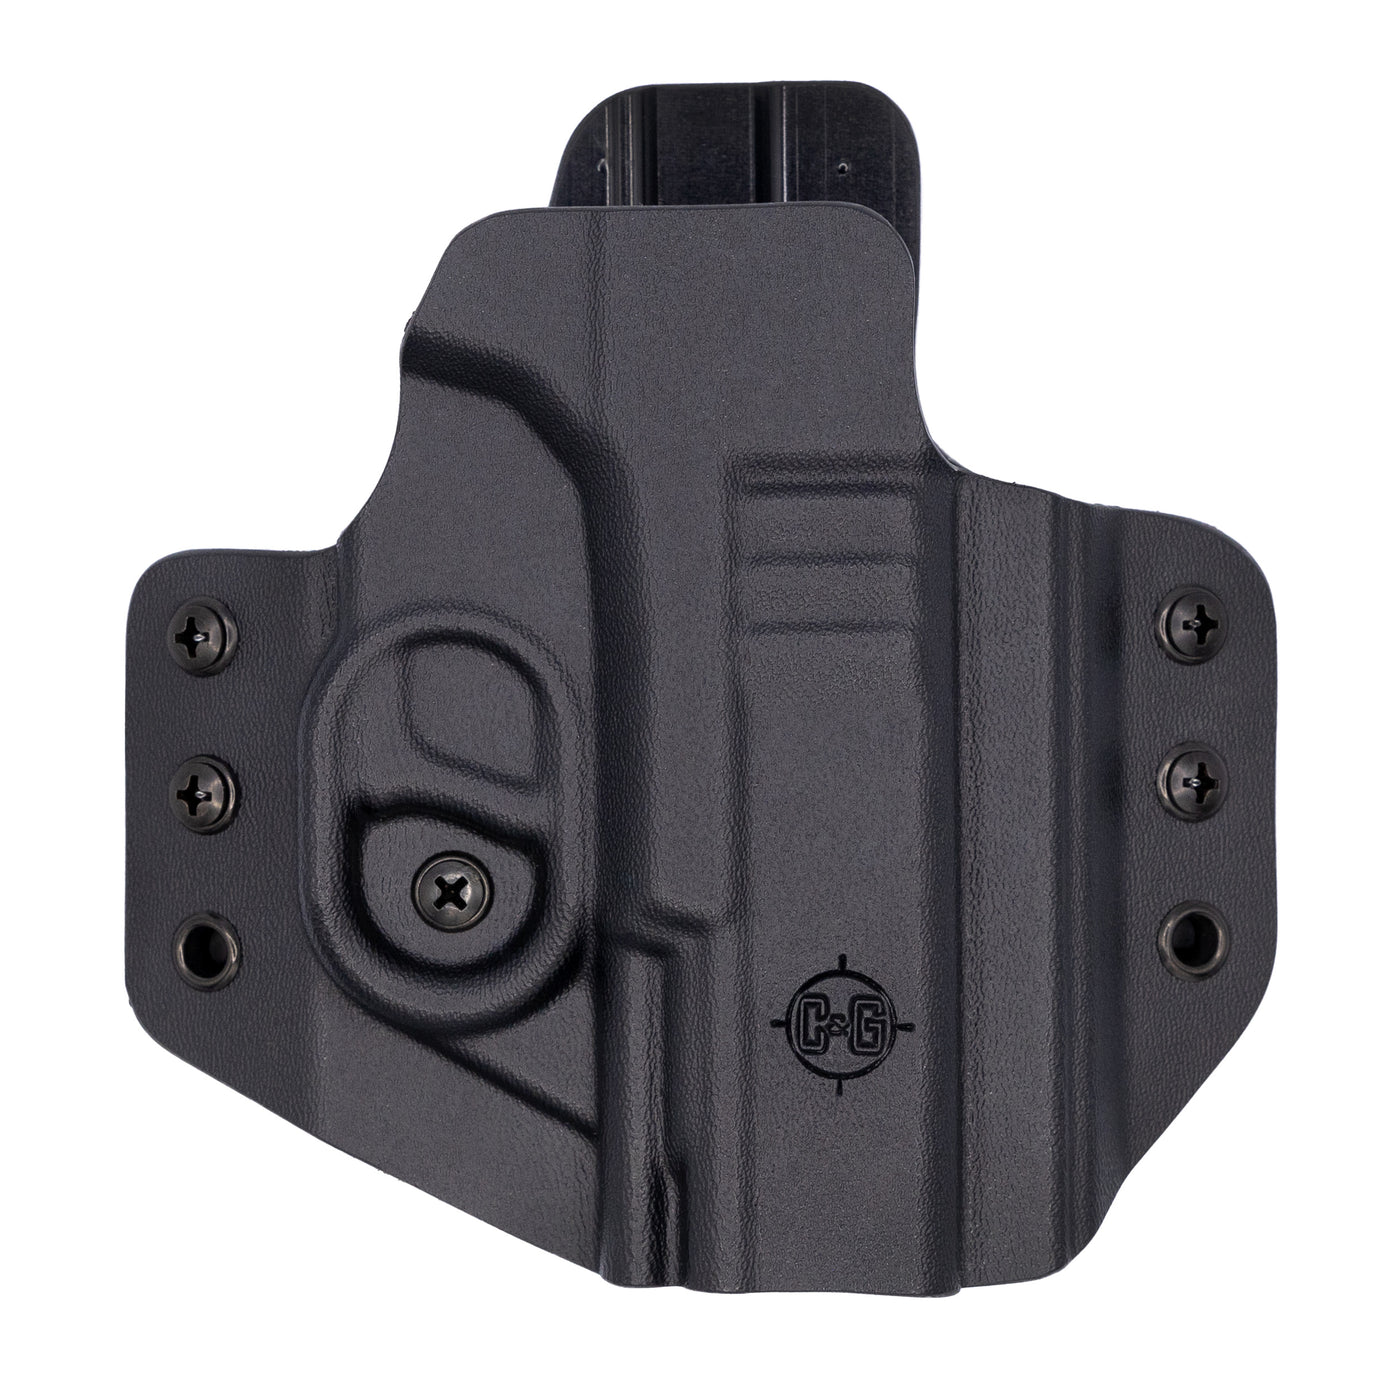 C&G Holsters quickship OWB Outside the waistband Holster for the Polymer80 Poly80 PF9/40c